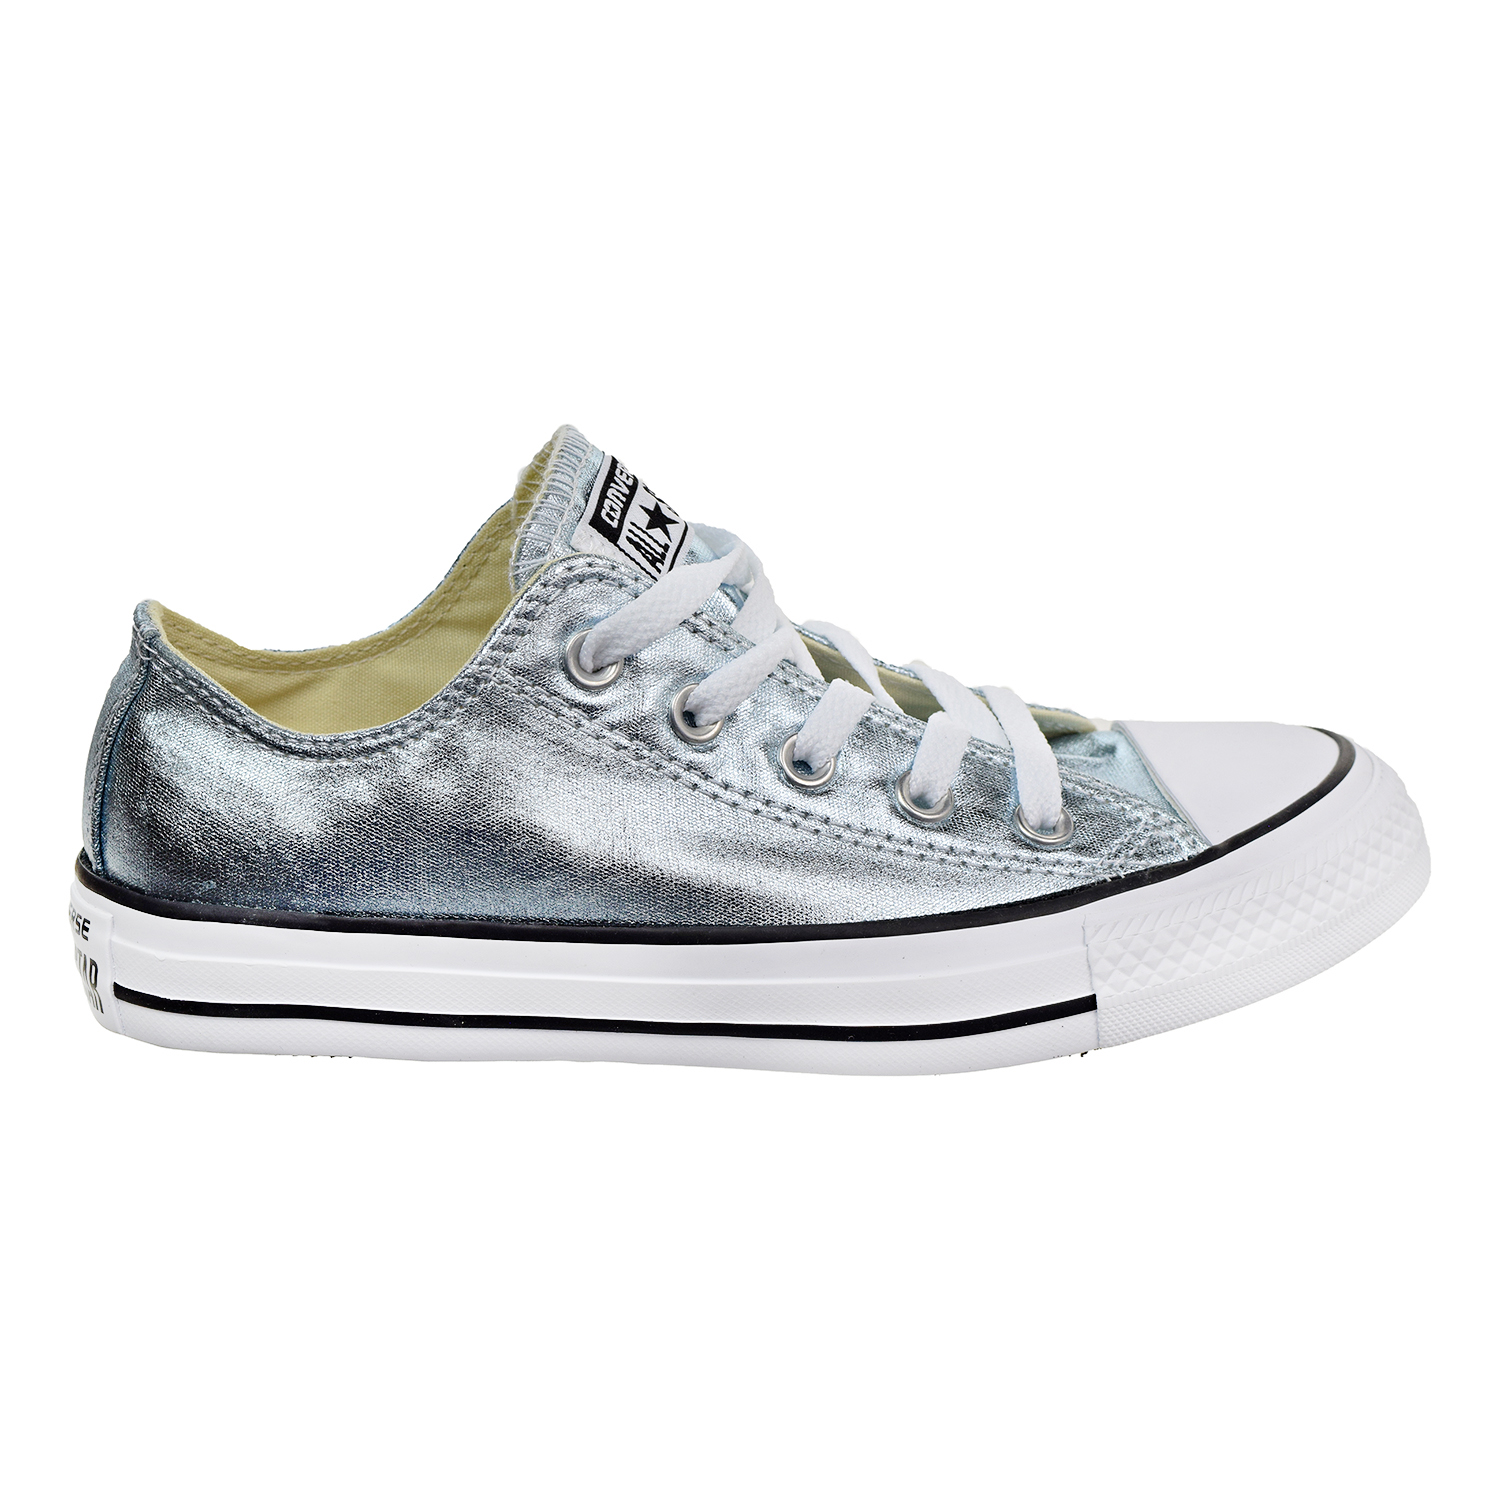 Converse Chuck Taylor All Star OX Unisex Shoes Metallic Blue 154038f - image 1 of 1